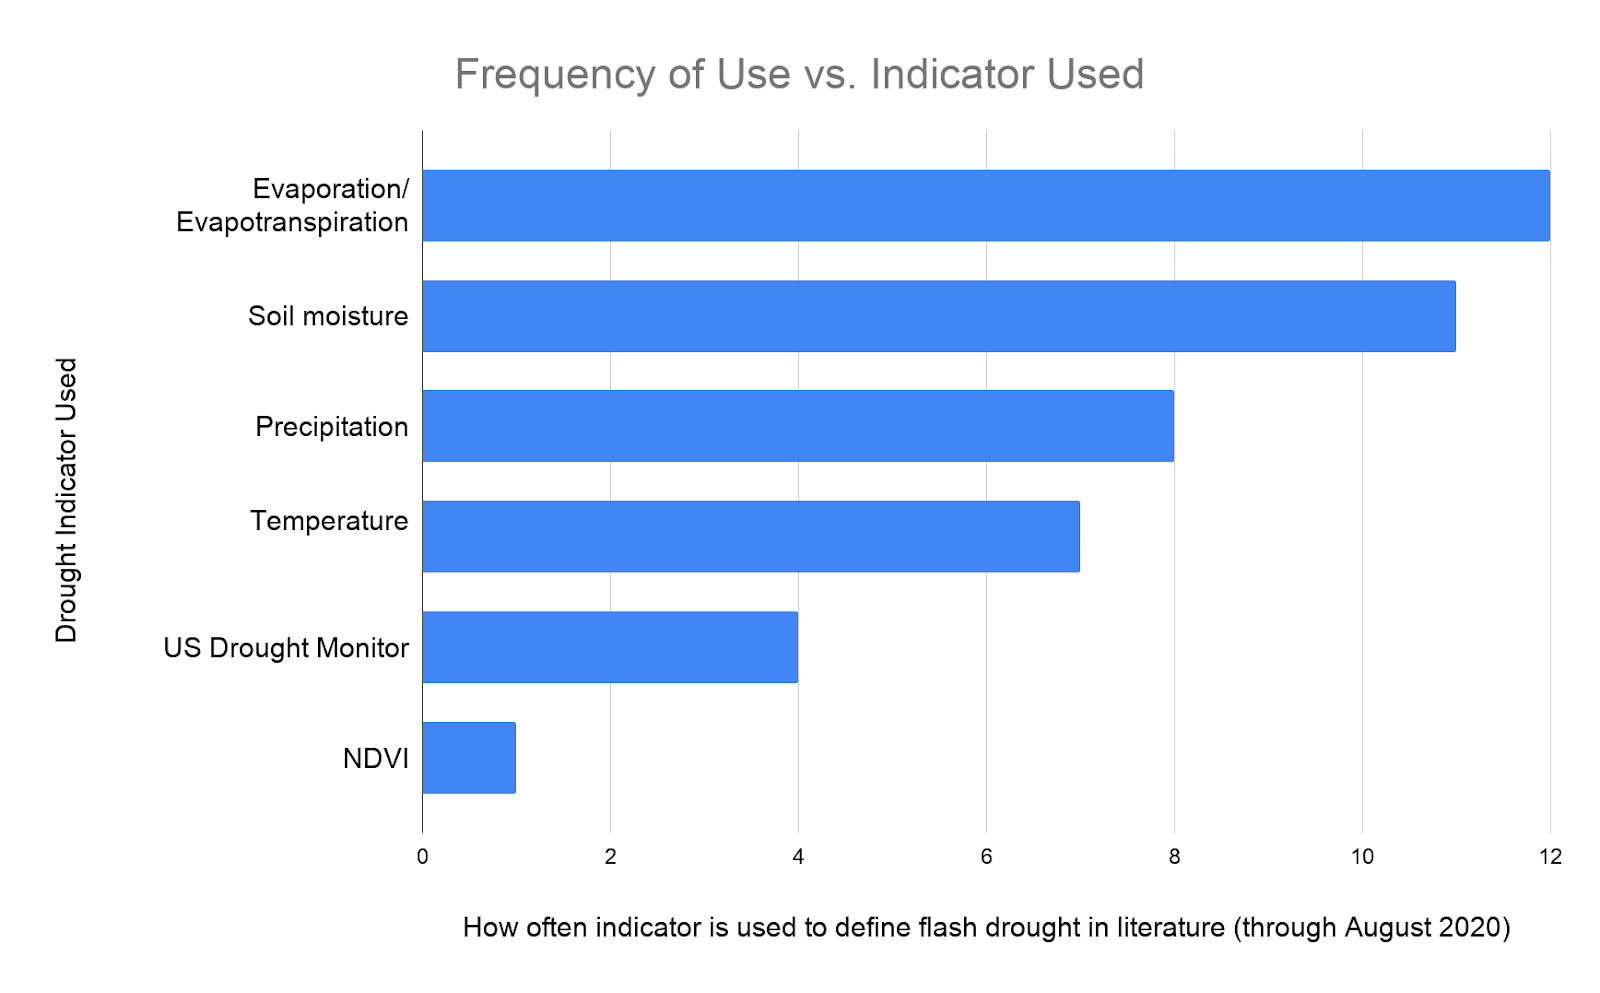 Chart of how often various indicators are used to define flash drought in the literature (through August 2020). Evapotranspiration/evaporation is the most used indicator (12 times), followed by soil moisture (11 times), and precipitation (8 times).